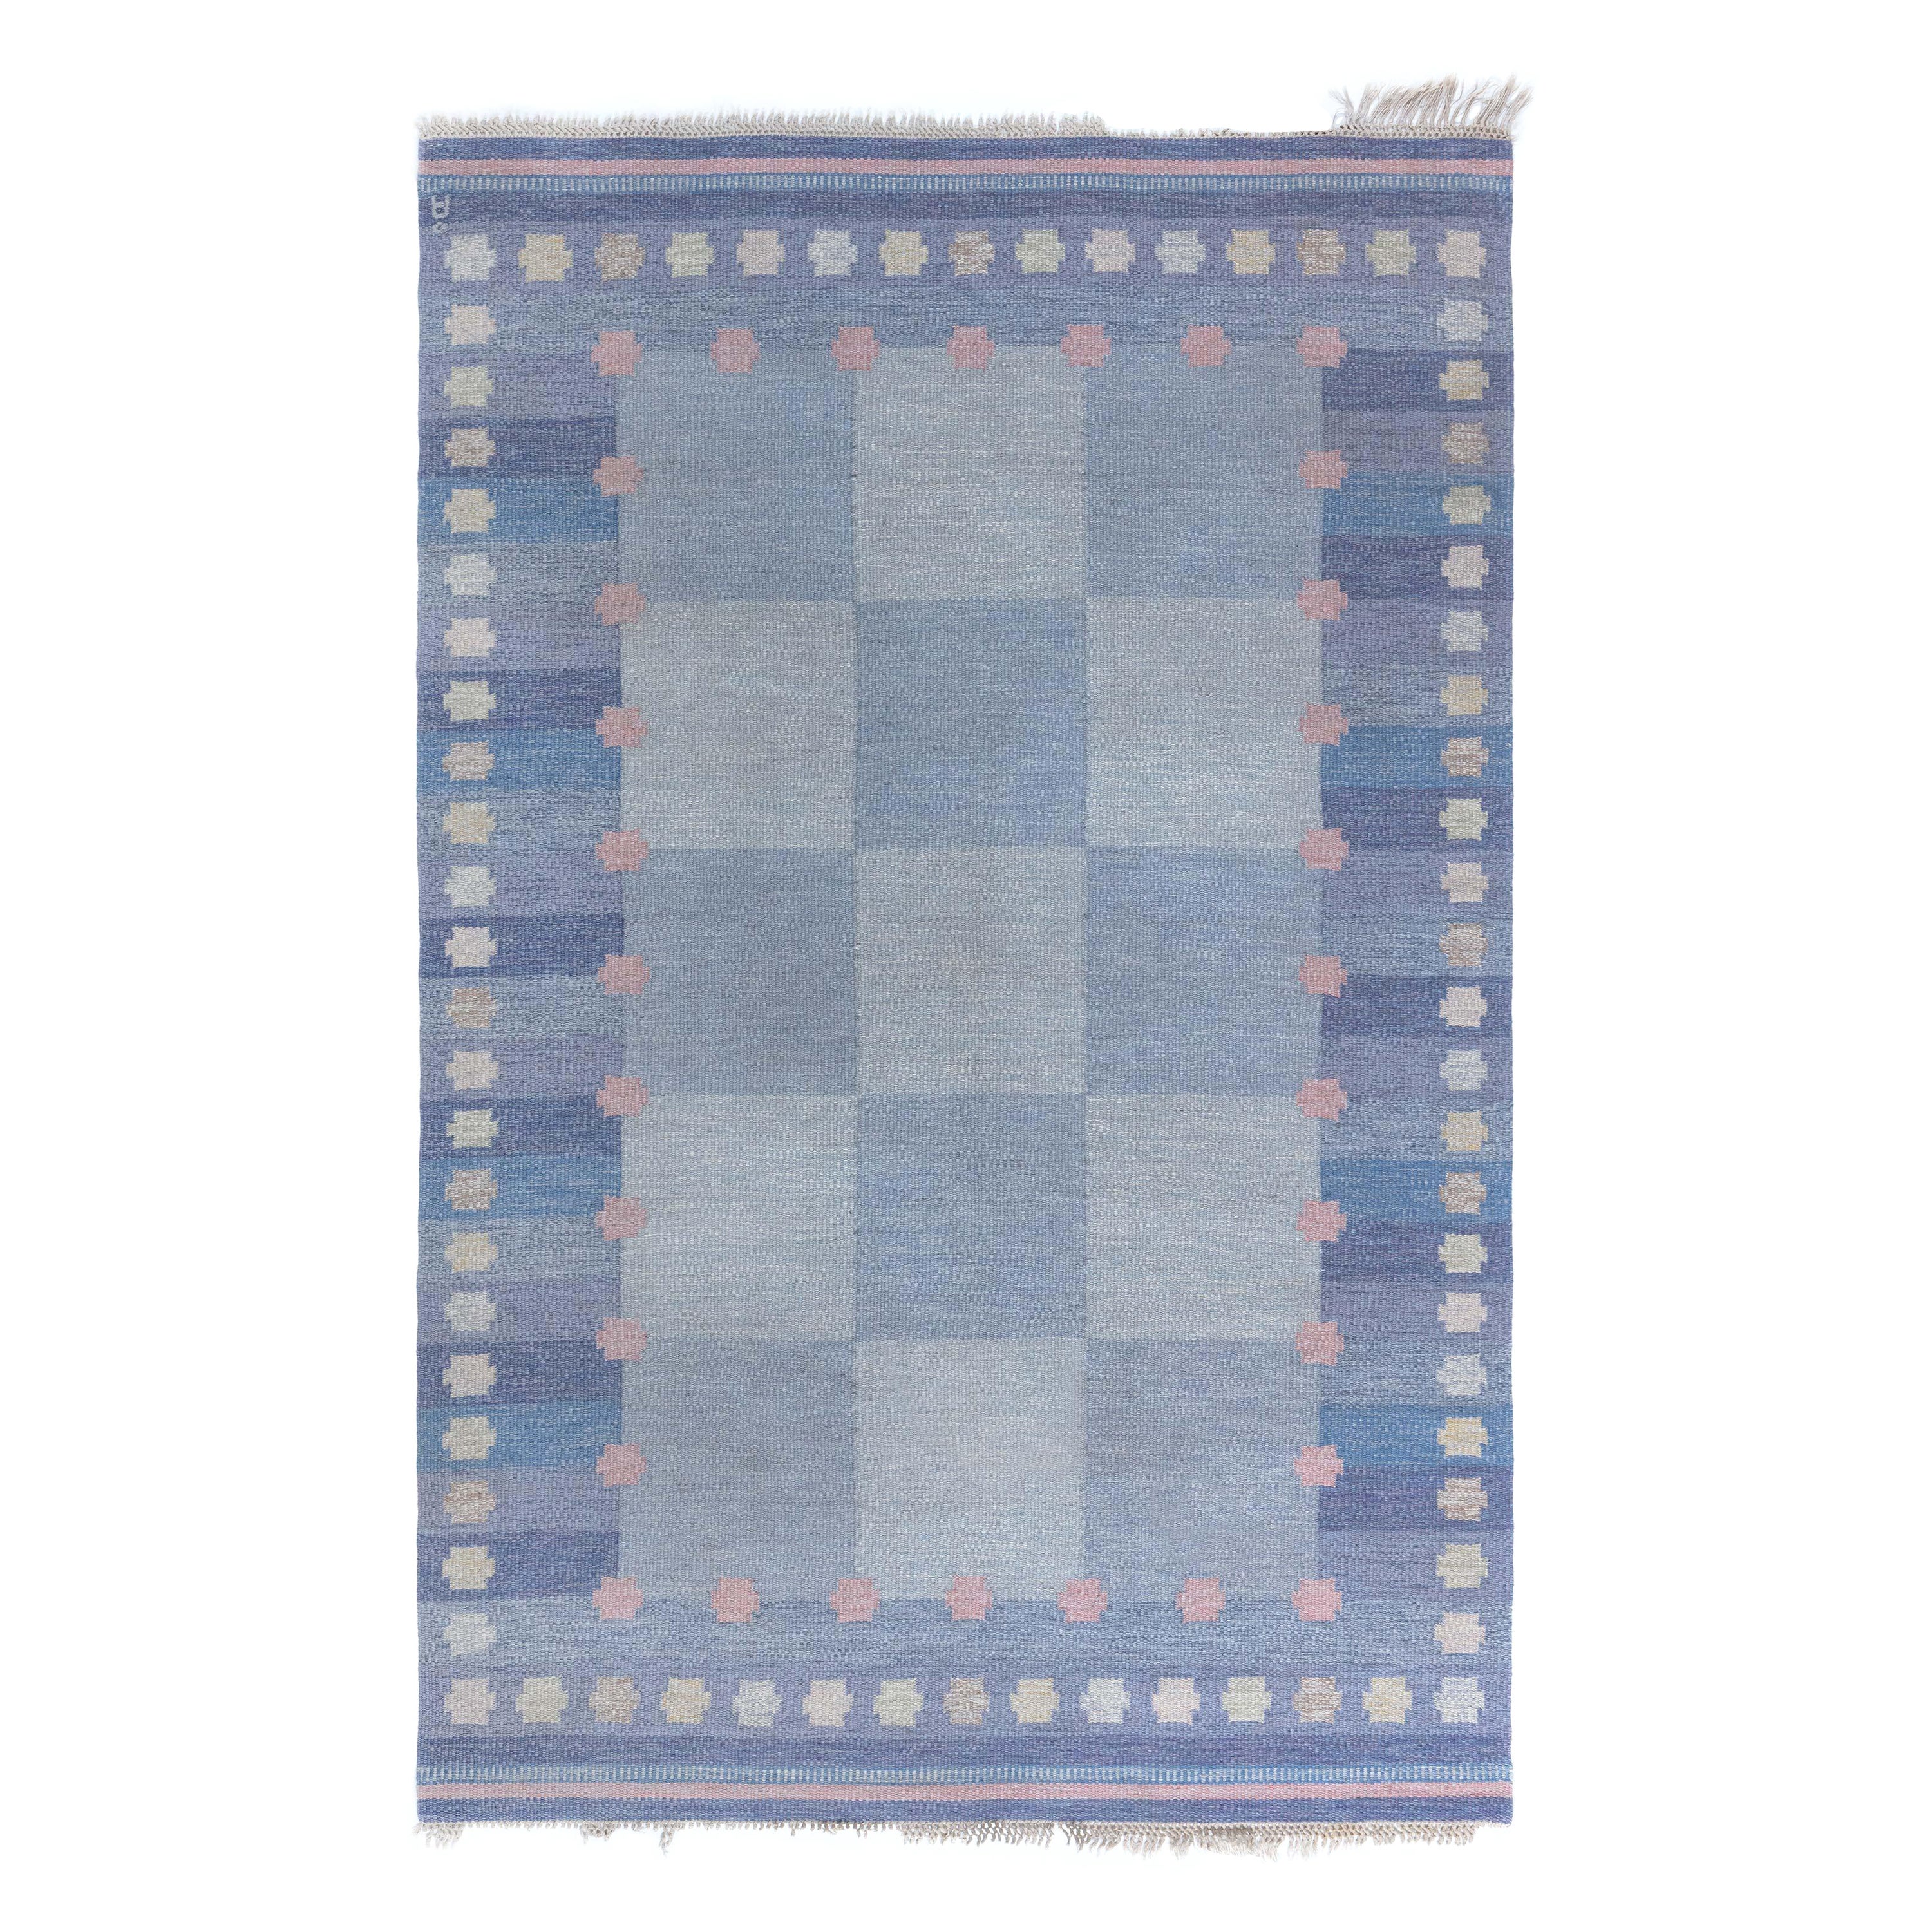 Mid-20th Century Swedish Flat Woven Rug by Agda Osterberg